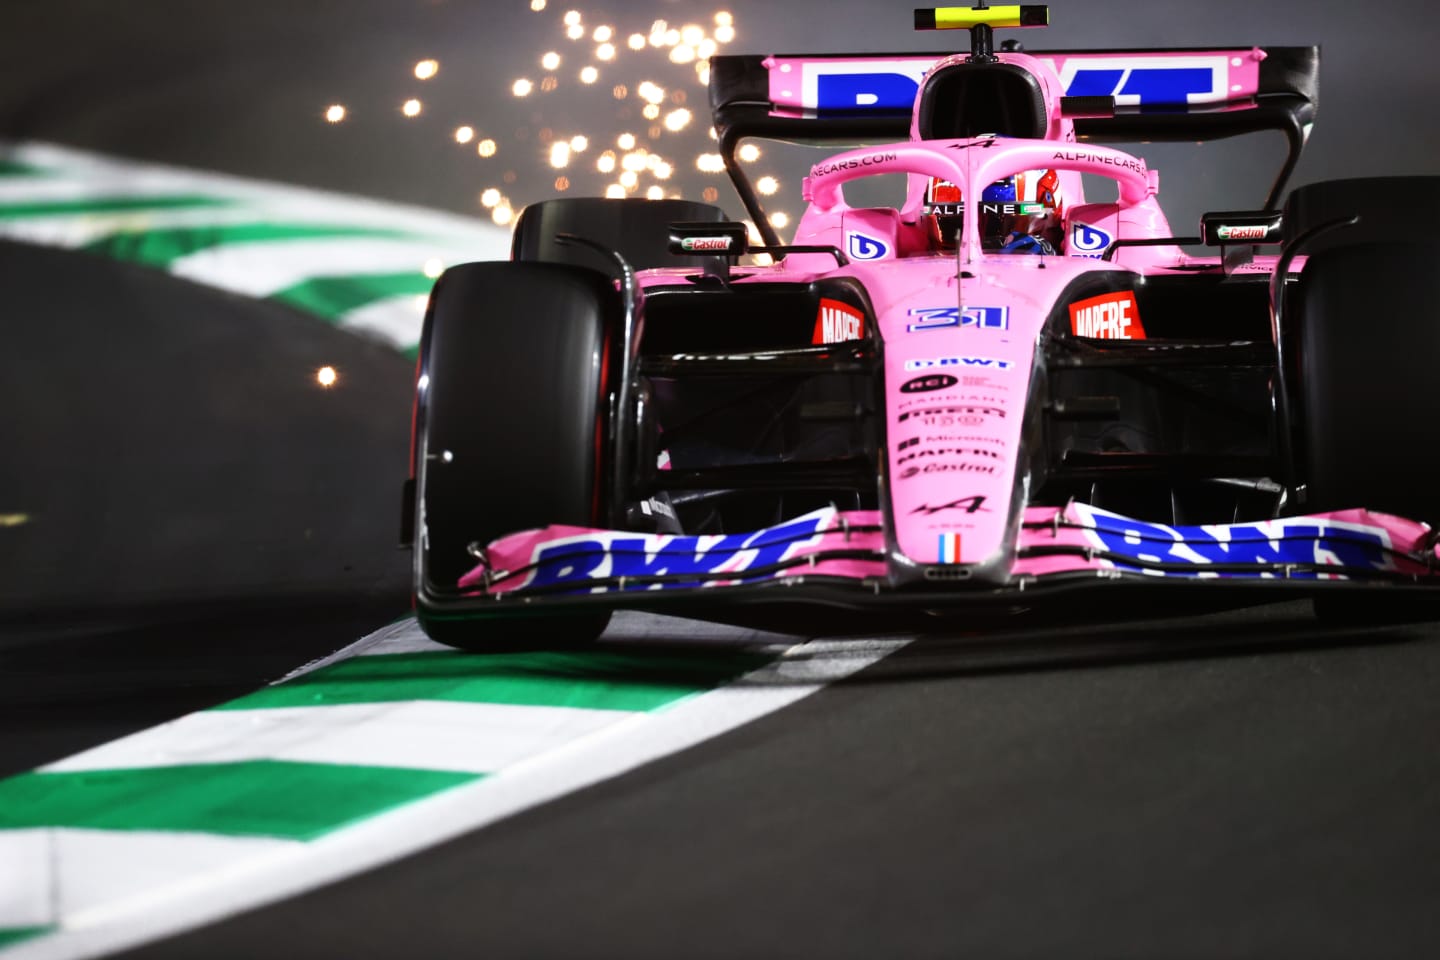 JEDDAH, SAUDI ARABIA - MARCH 26: Sparks fly behind Esteban Ocon of France driving the (31) Alpine F1 A522 Renault during qualifying ahead of the F1 Grand Prix of Saudi Arabia at the Jeddah Corniche Circuit on March 26, 2022 in Jeddah, Saudi Arabia. (Photo by Dan Istitene - Formula 1/Formula 1 via Getty Images)